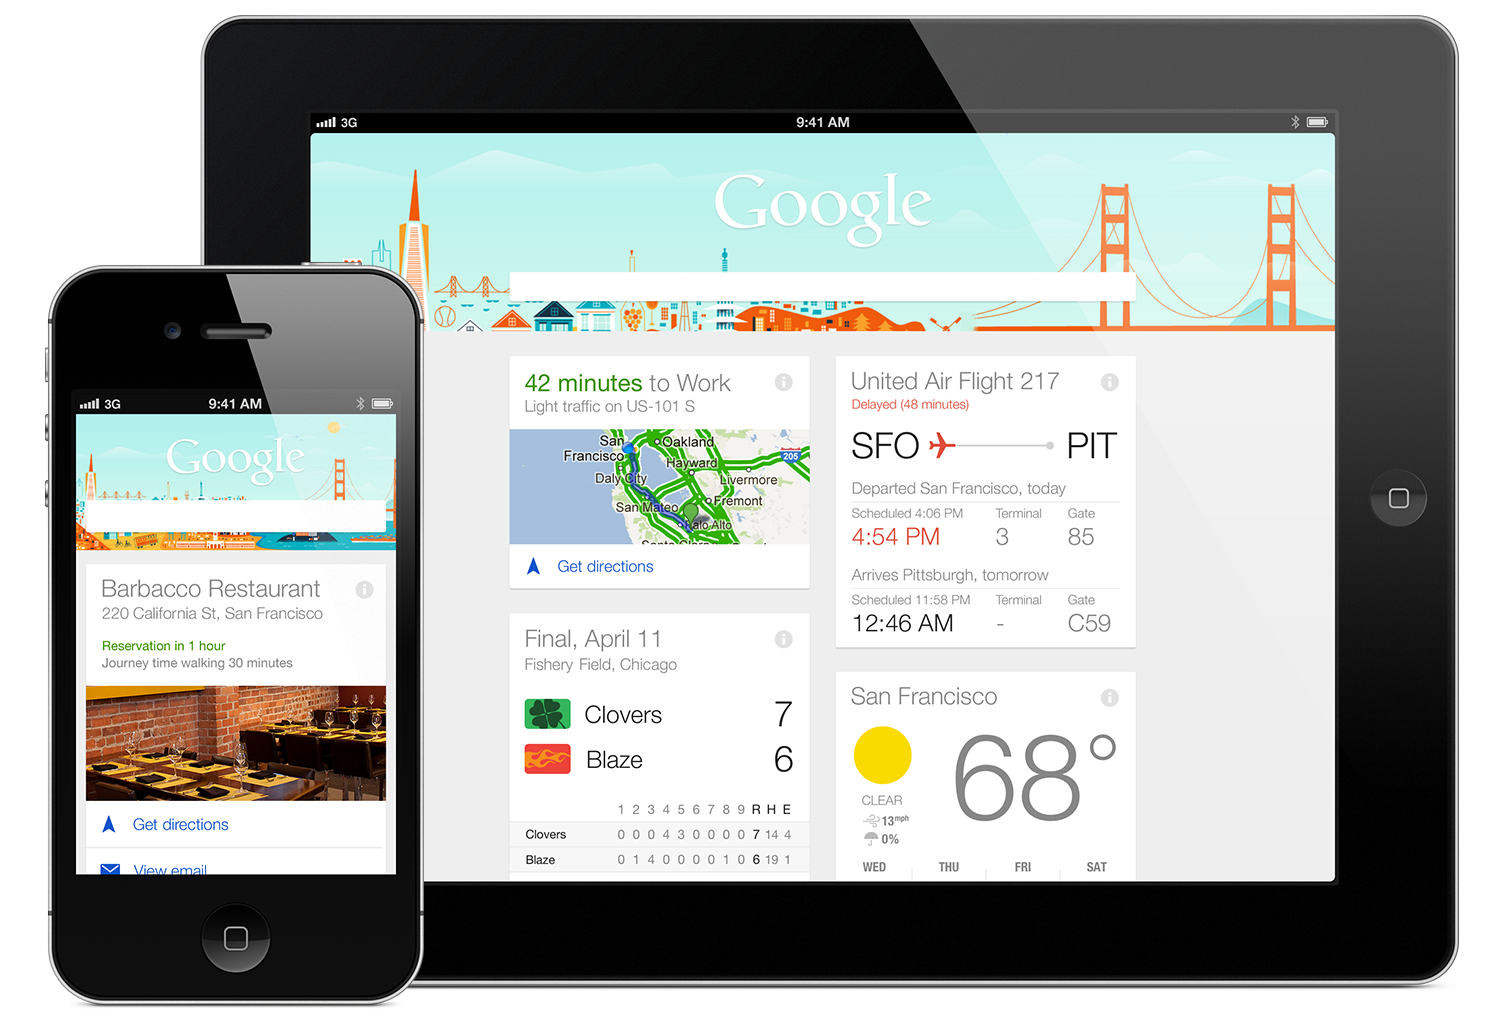 What is Google Now?